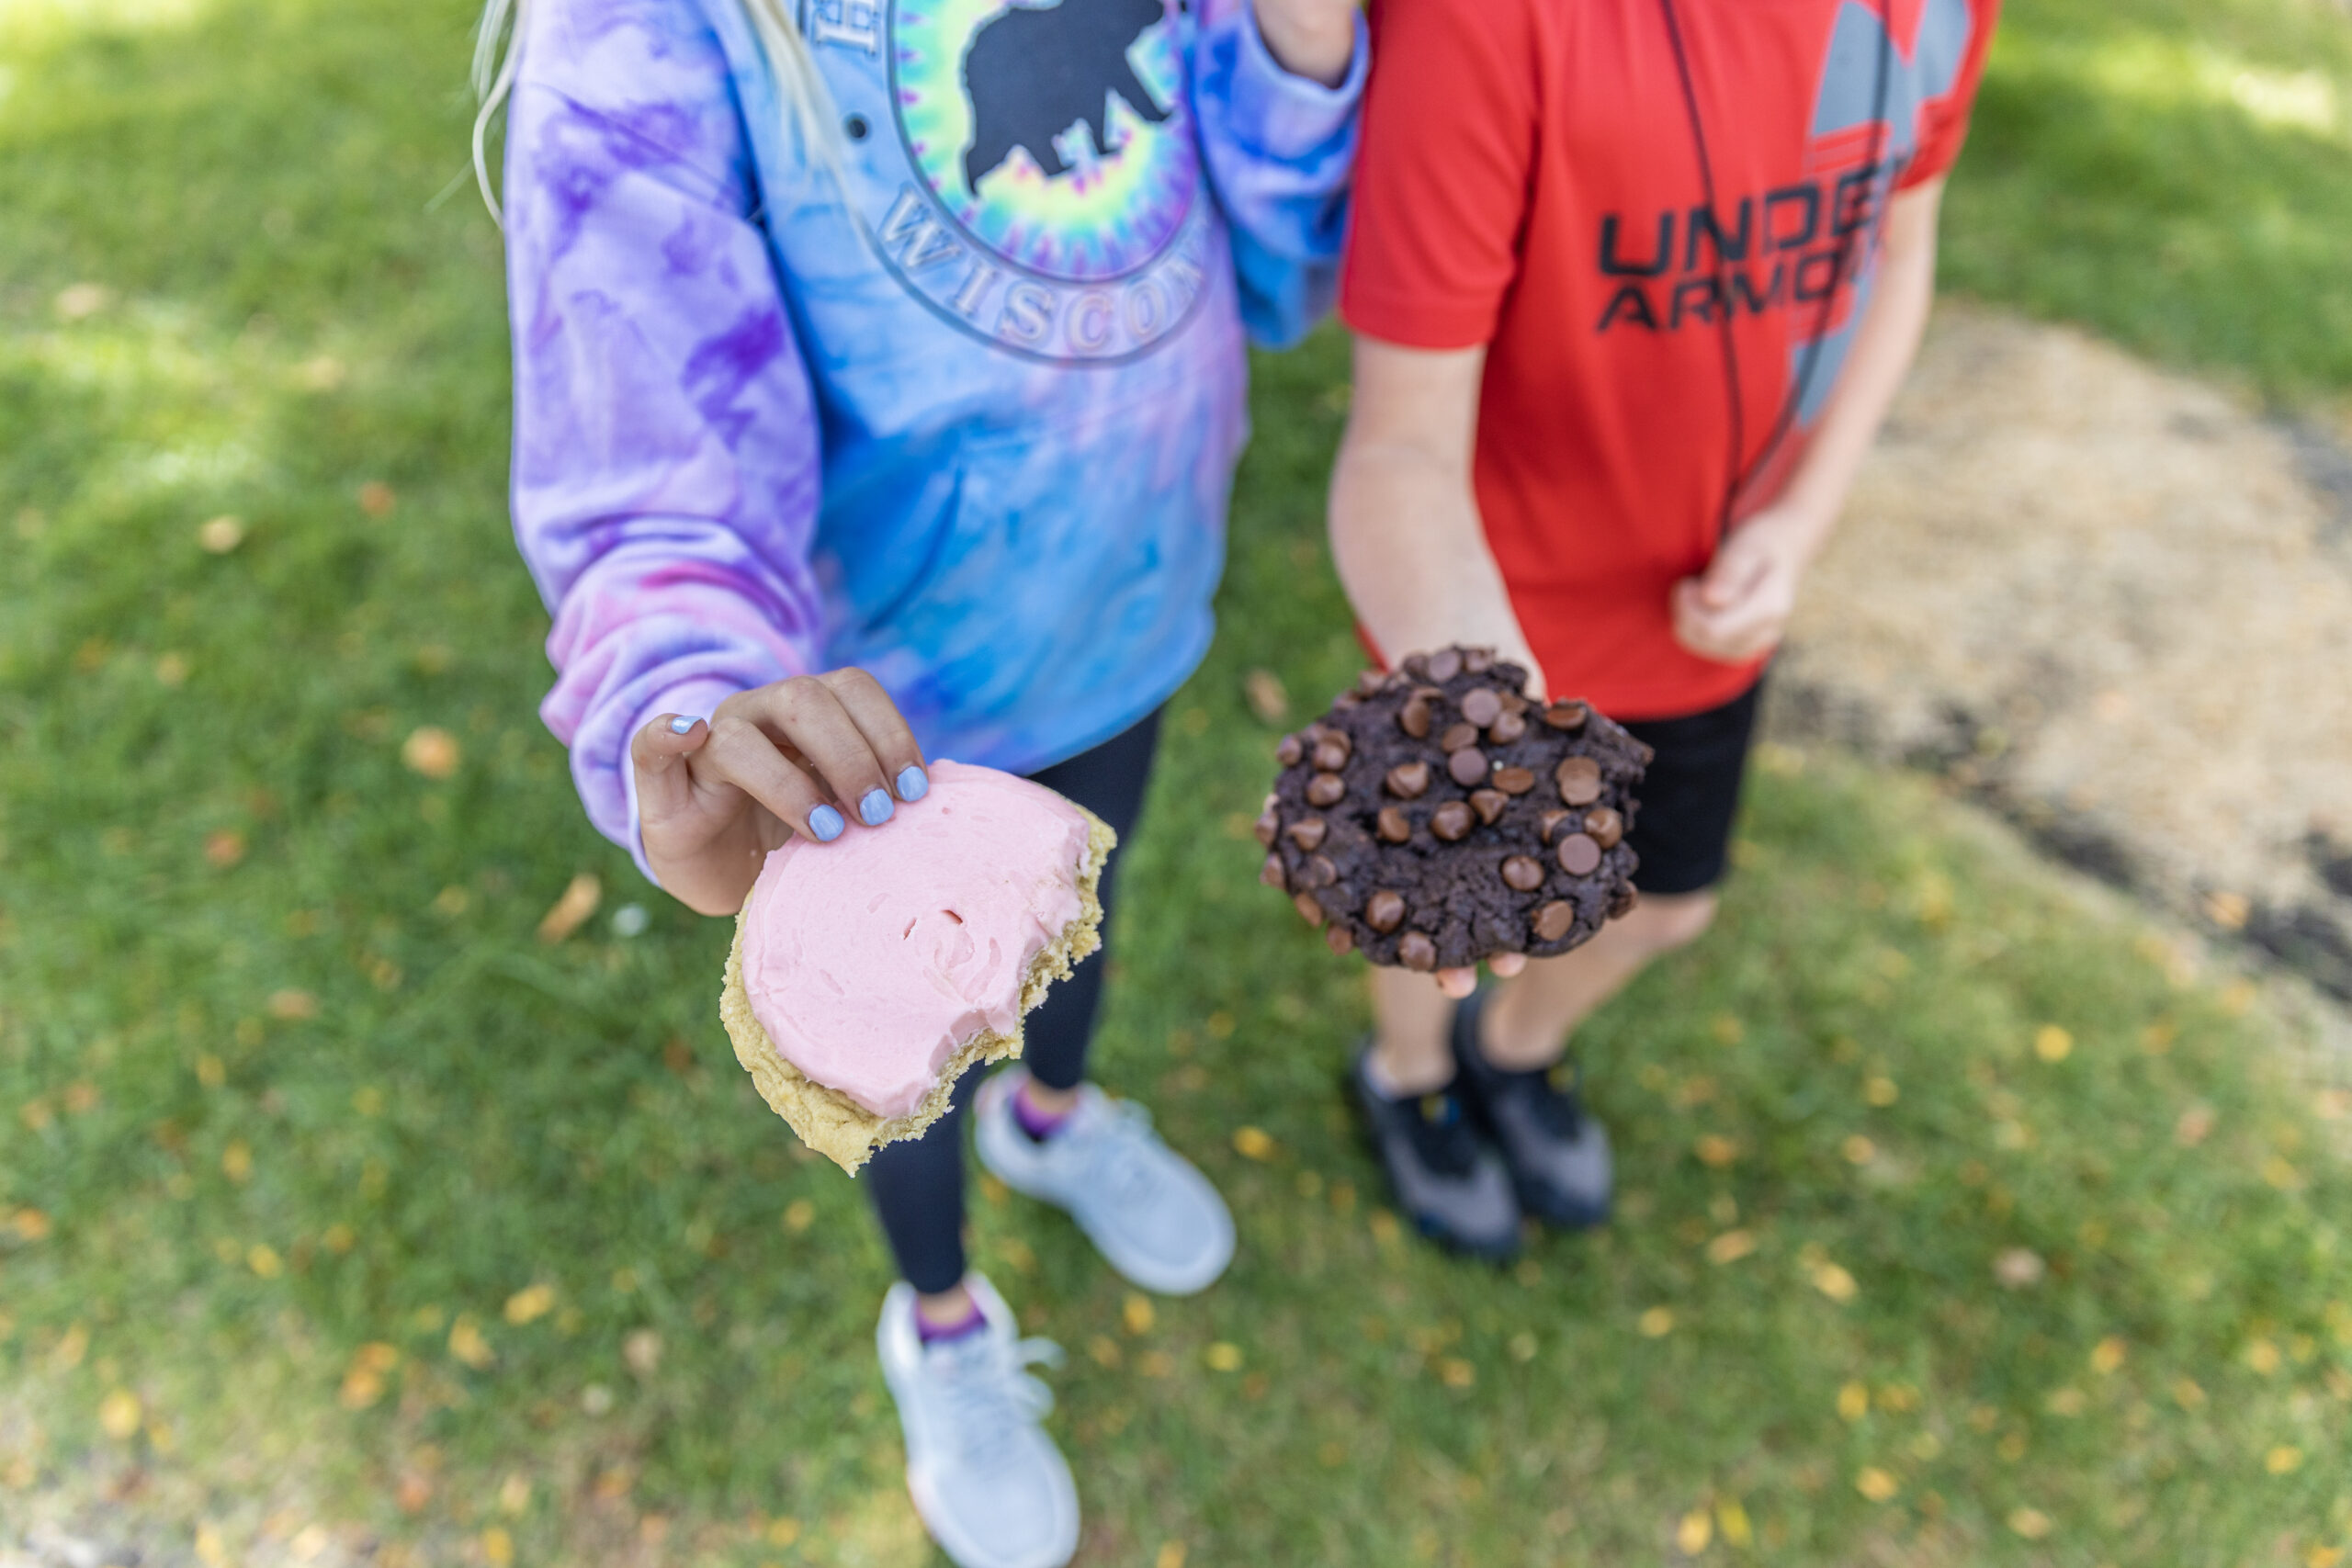 Two kids showcasing their treats from Crumbl Cookies.